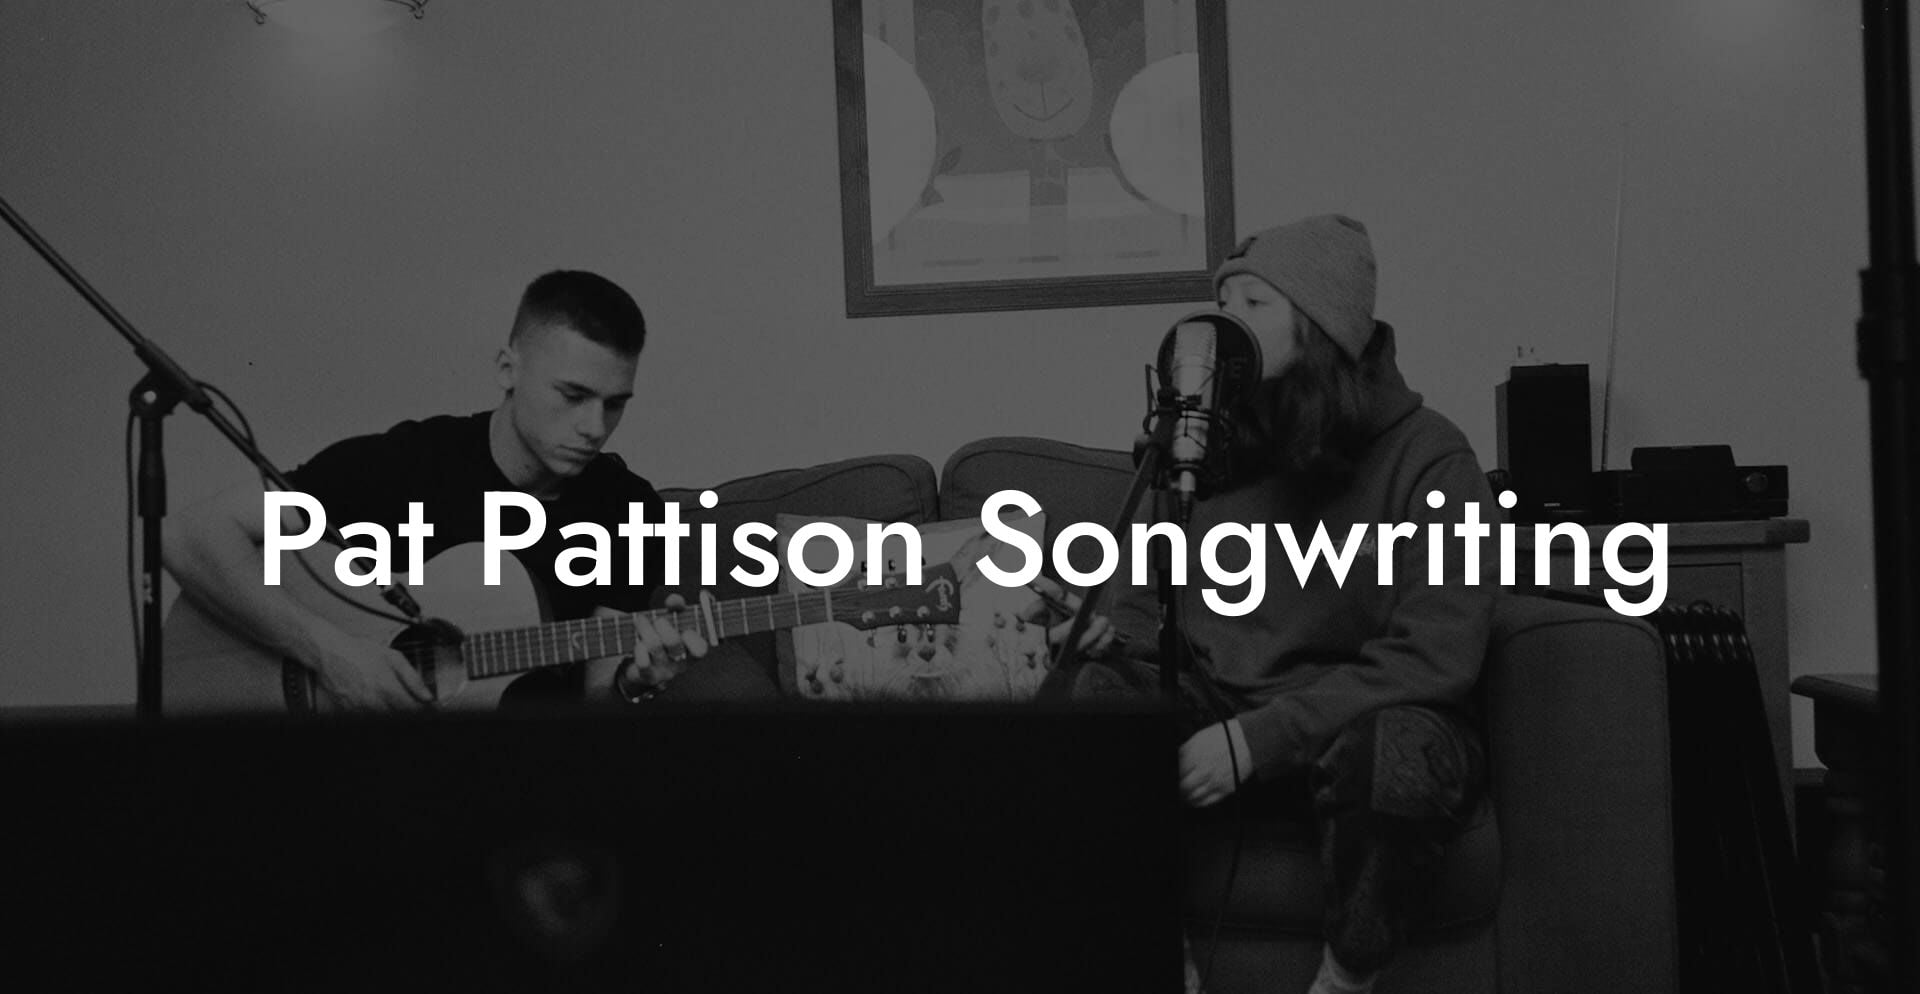 pat pattison songwriting lyric assistant